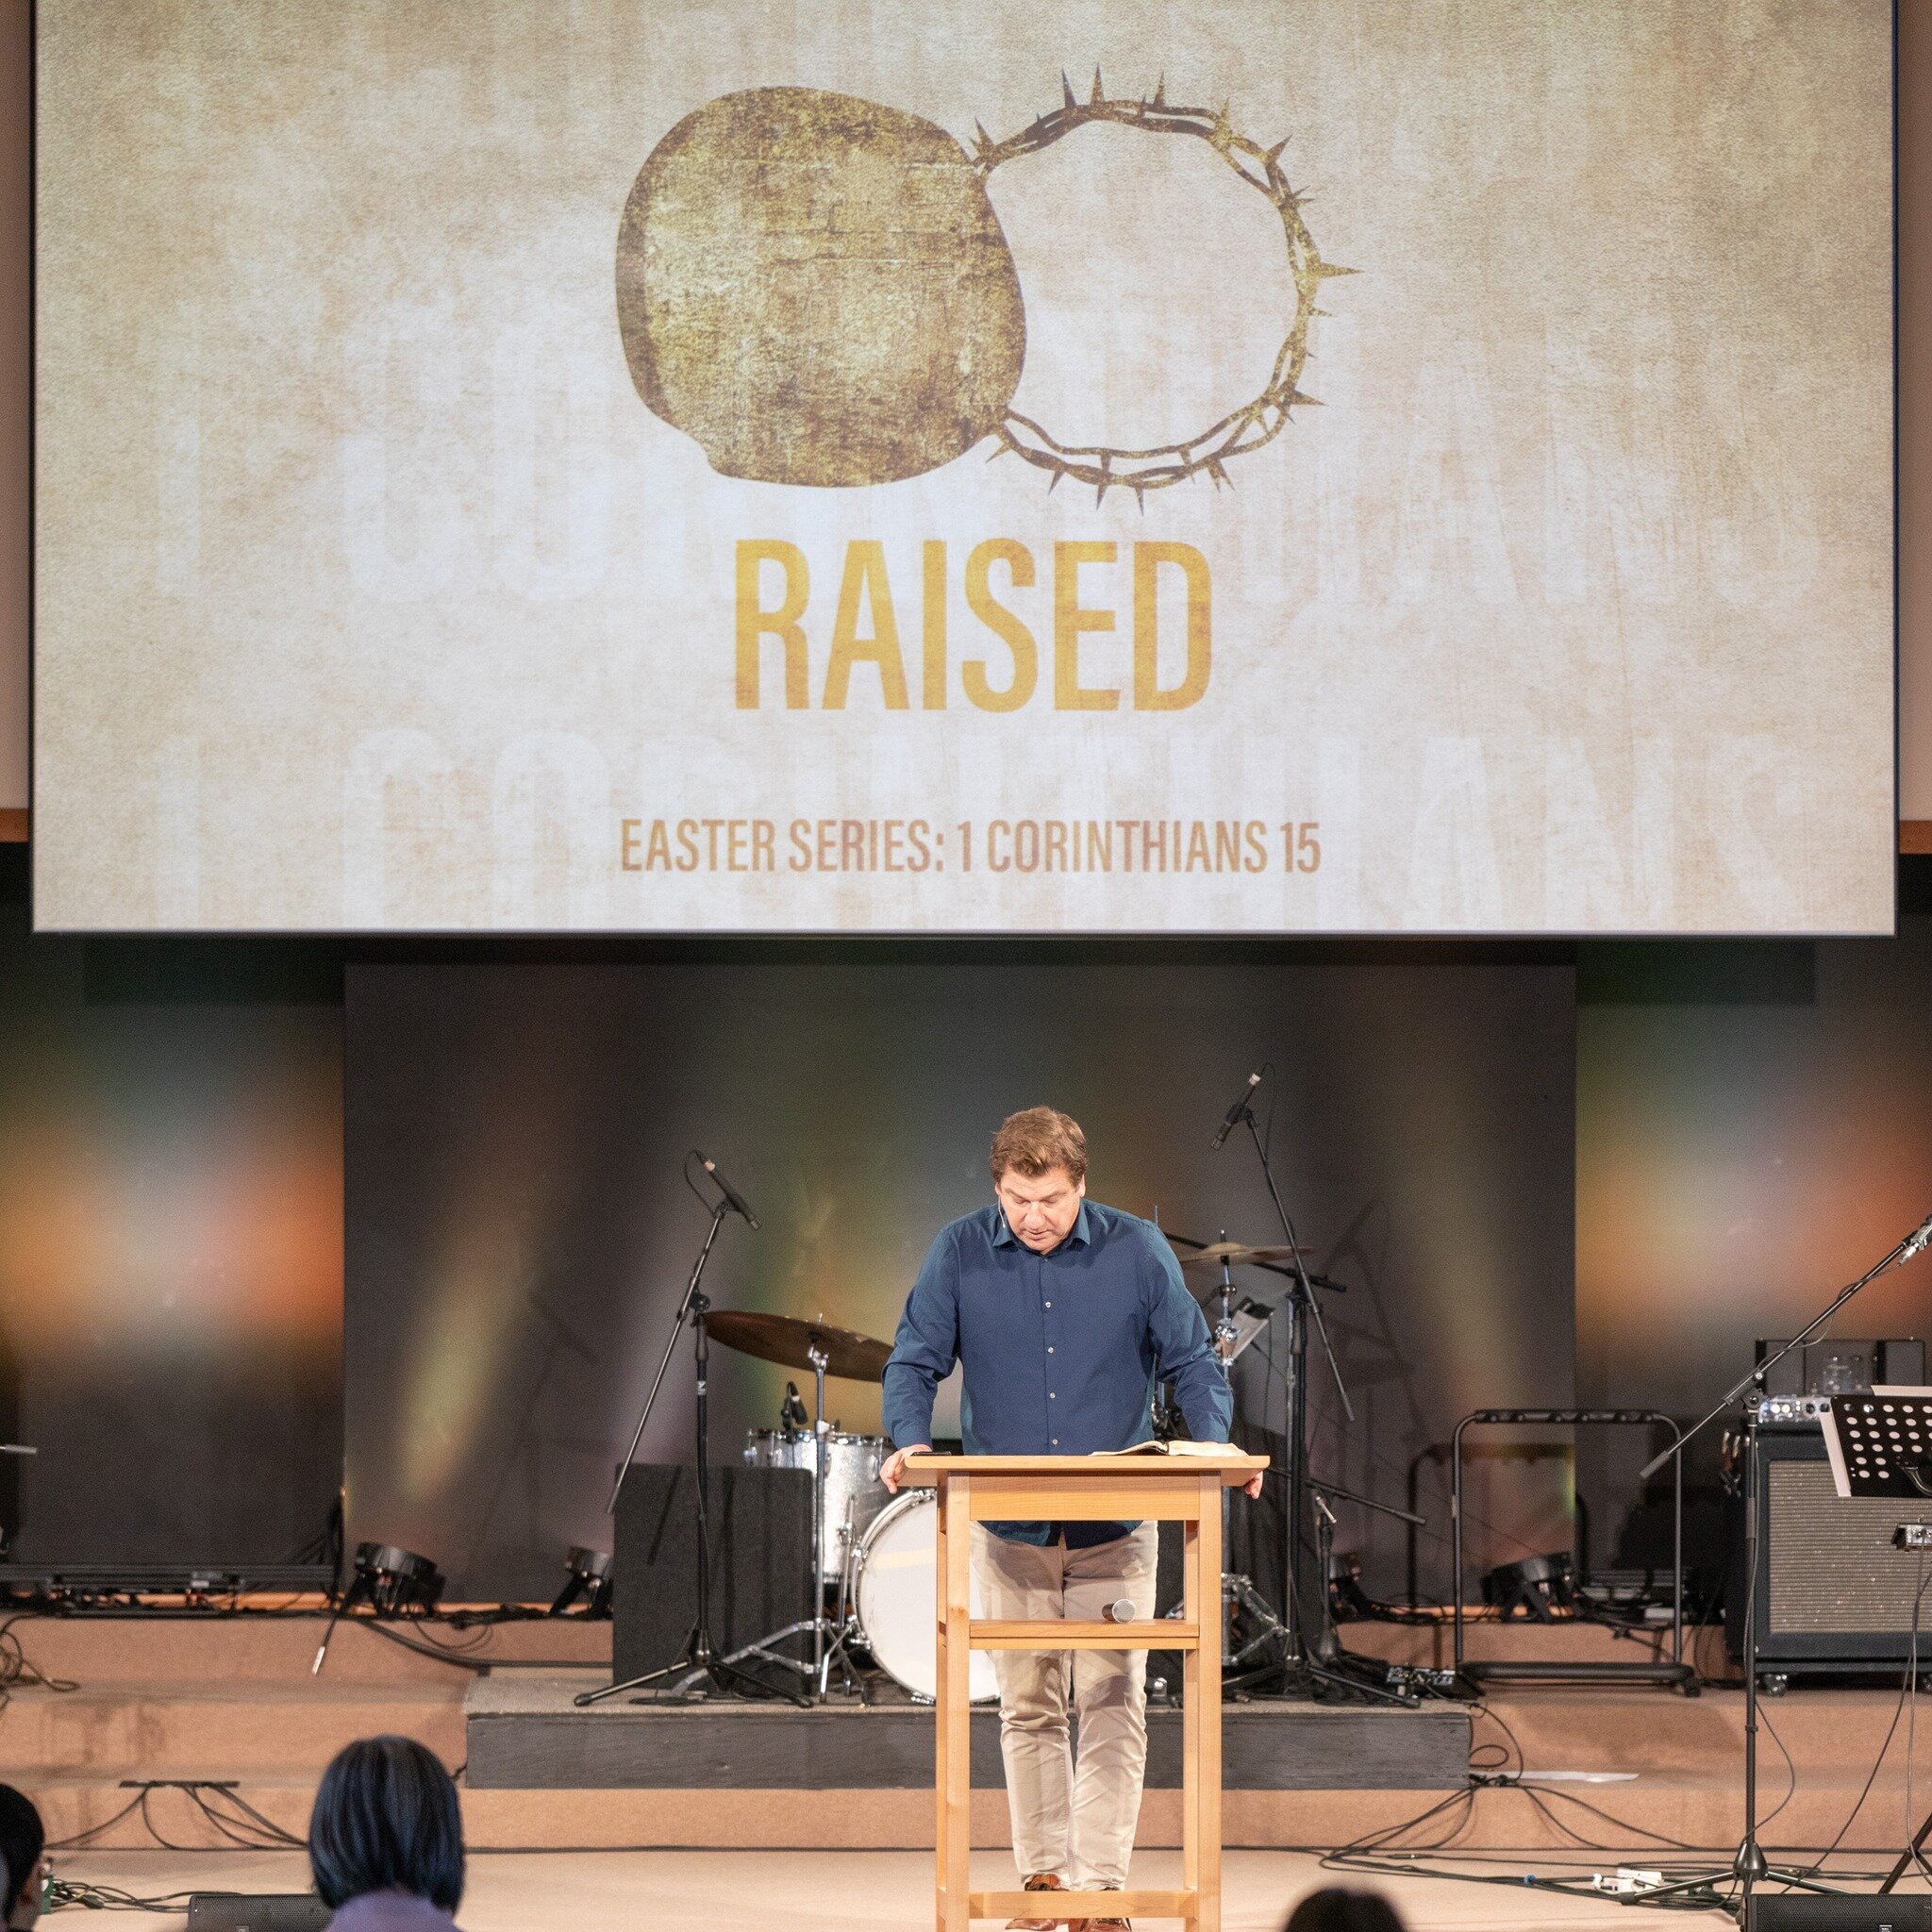 This Sunday we are continuing our RAISED Easter series, looking at I Corinthians 15:20-28. Come join us!

+ Sunday, March 26 @ 9 + 11am
+ 6060 Culloden St, Vancouver

midtownchurch.com/sunday